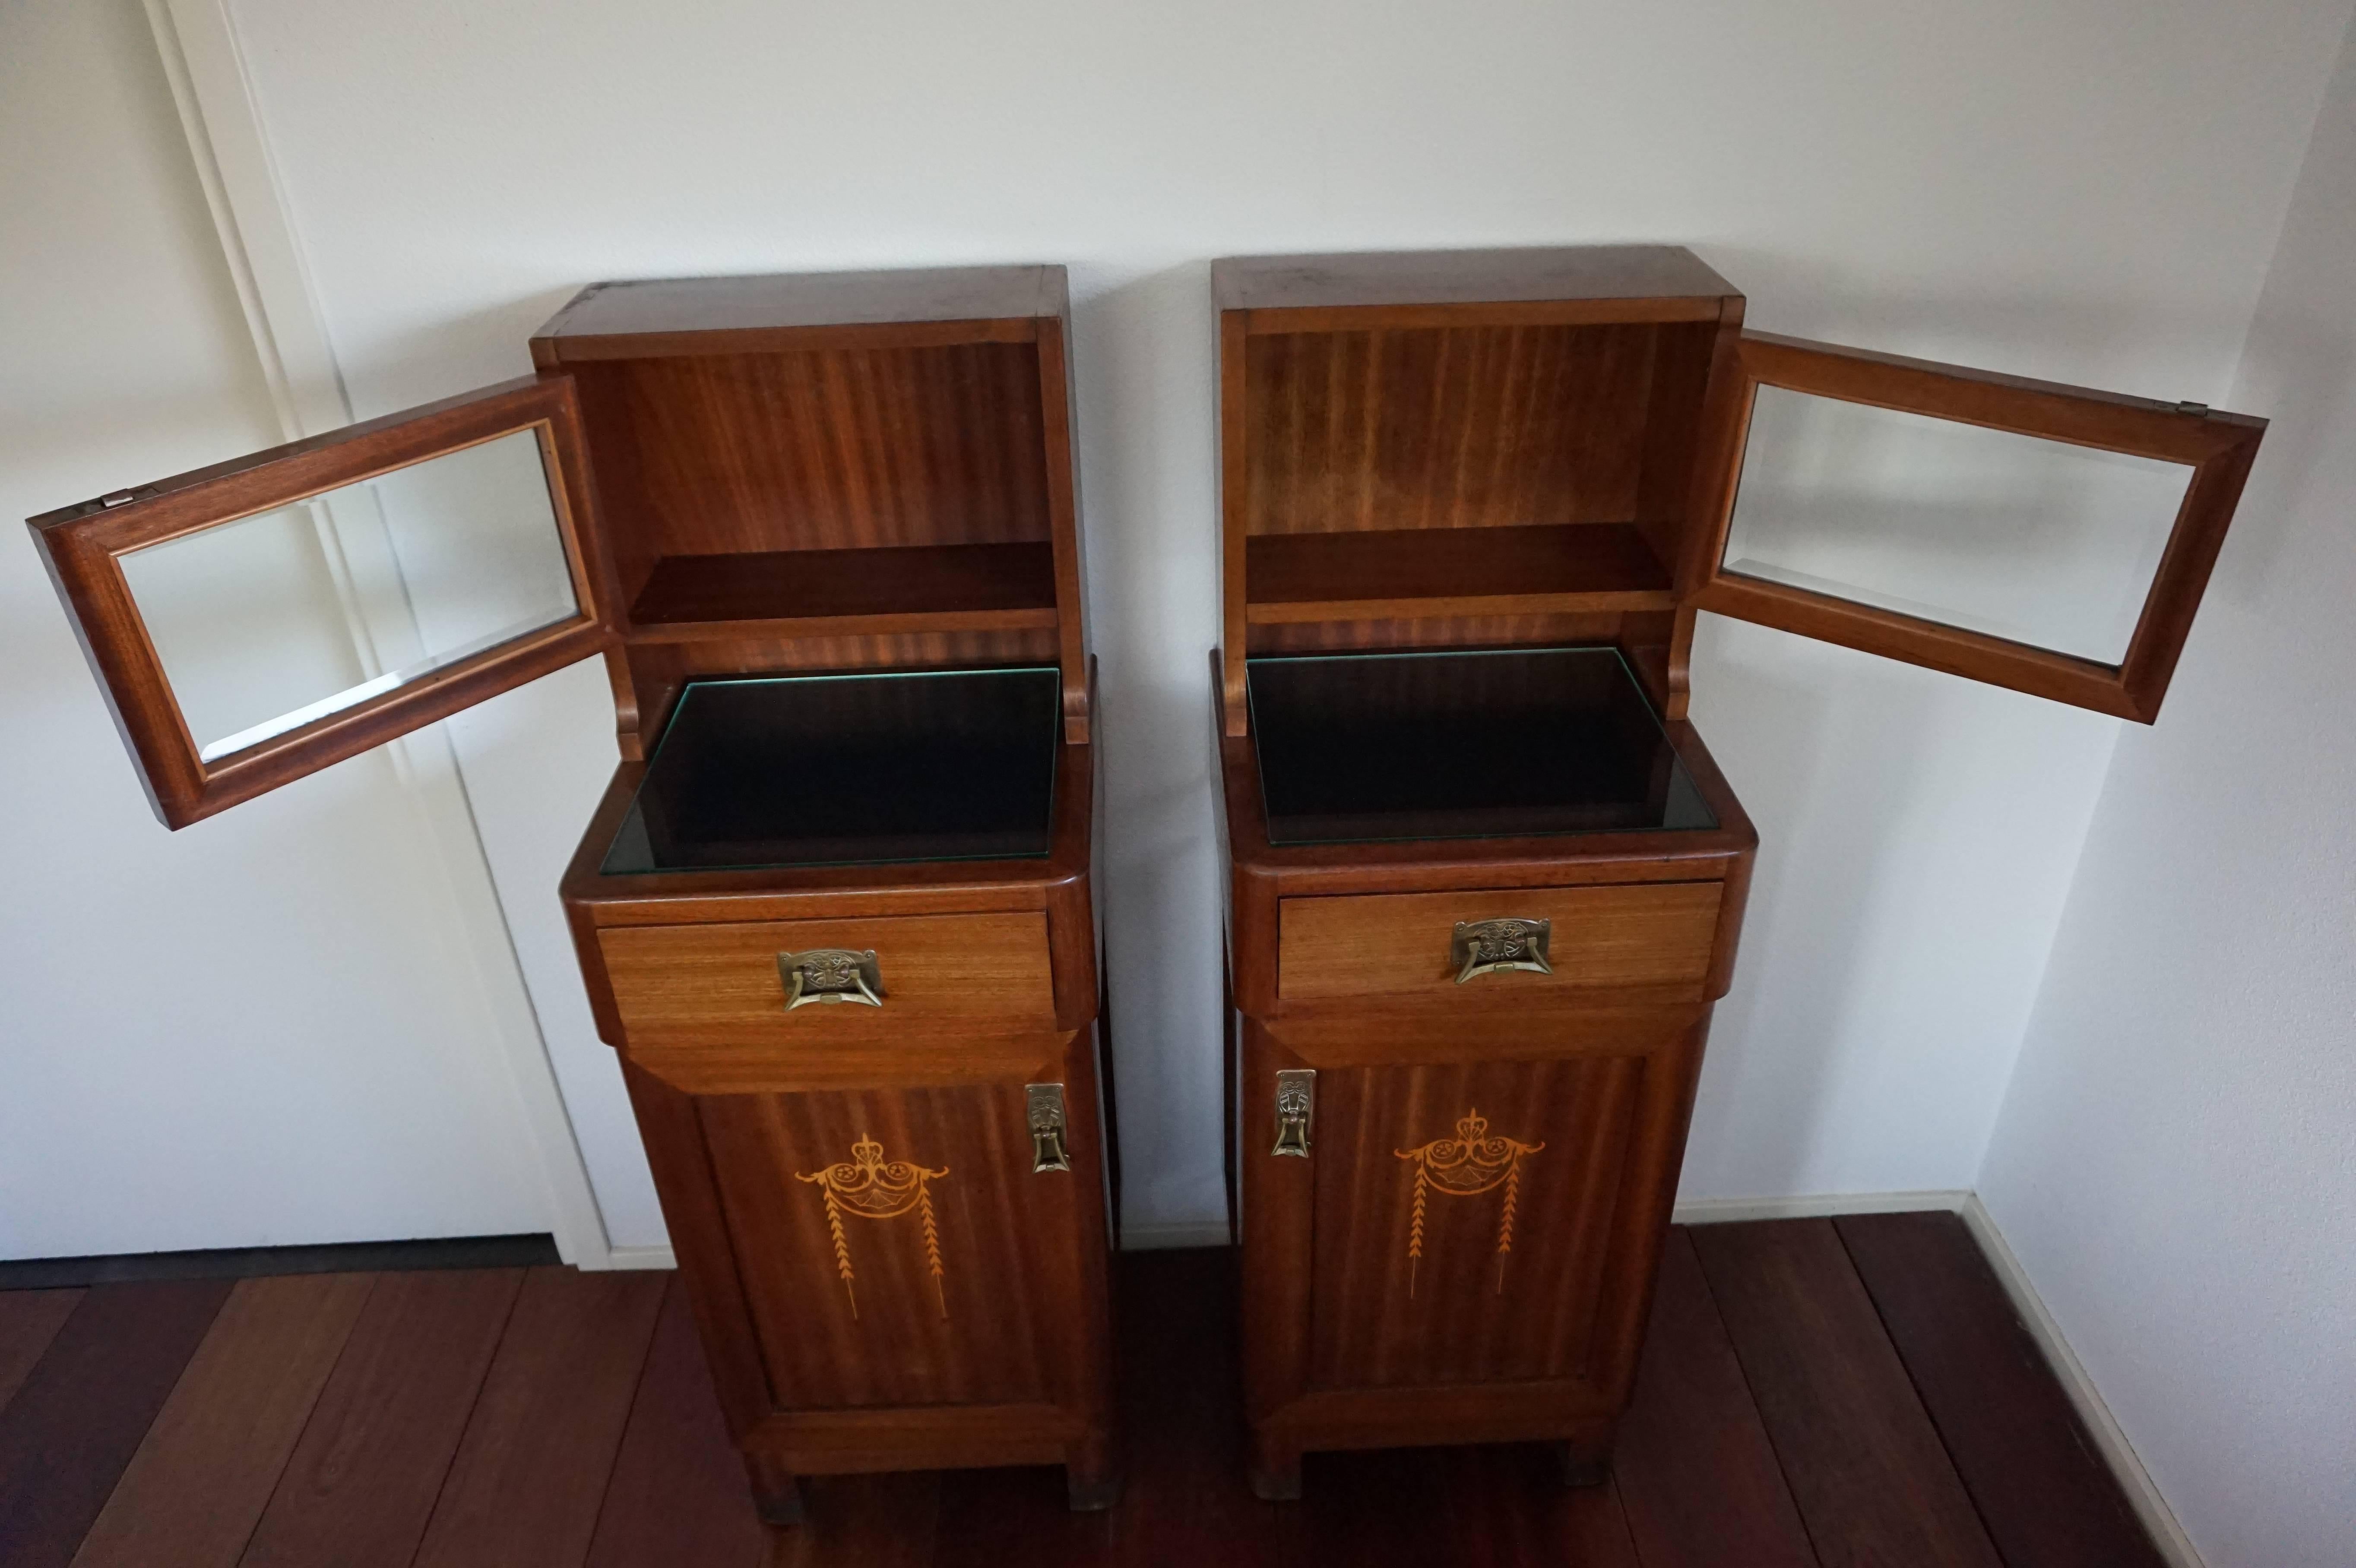 20th Century Wonderful Mahogany Art Nouveau Bedside Tables / Nightstands with Satinwood Inlay